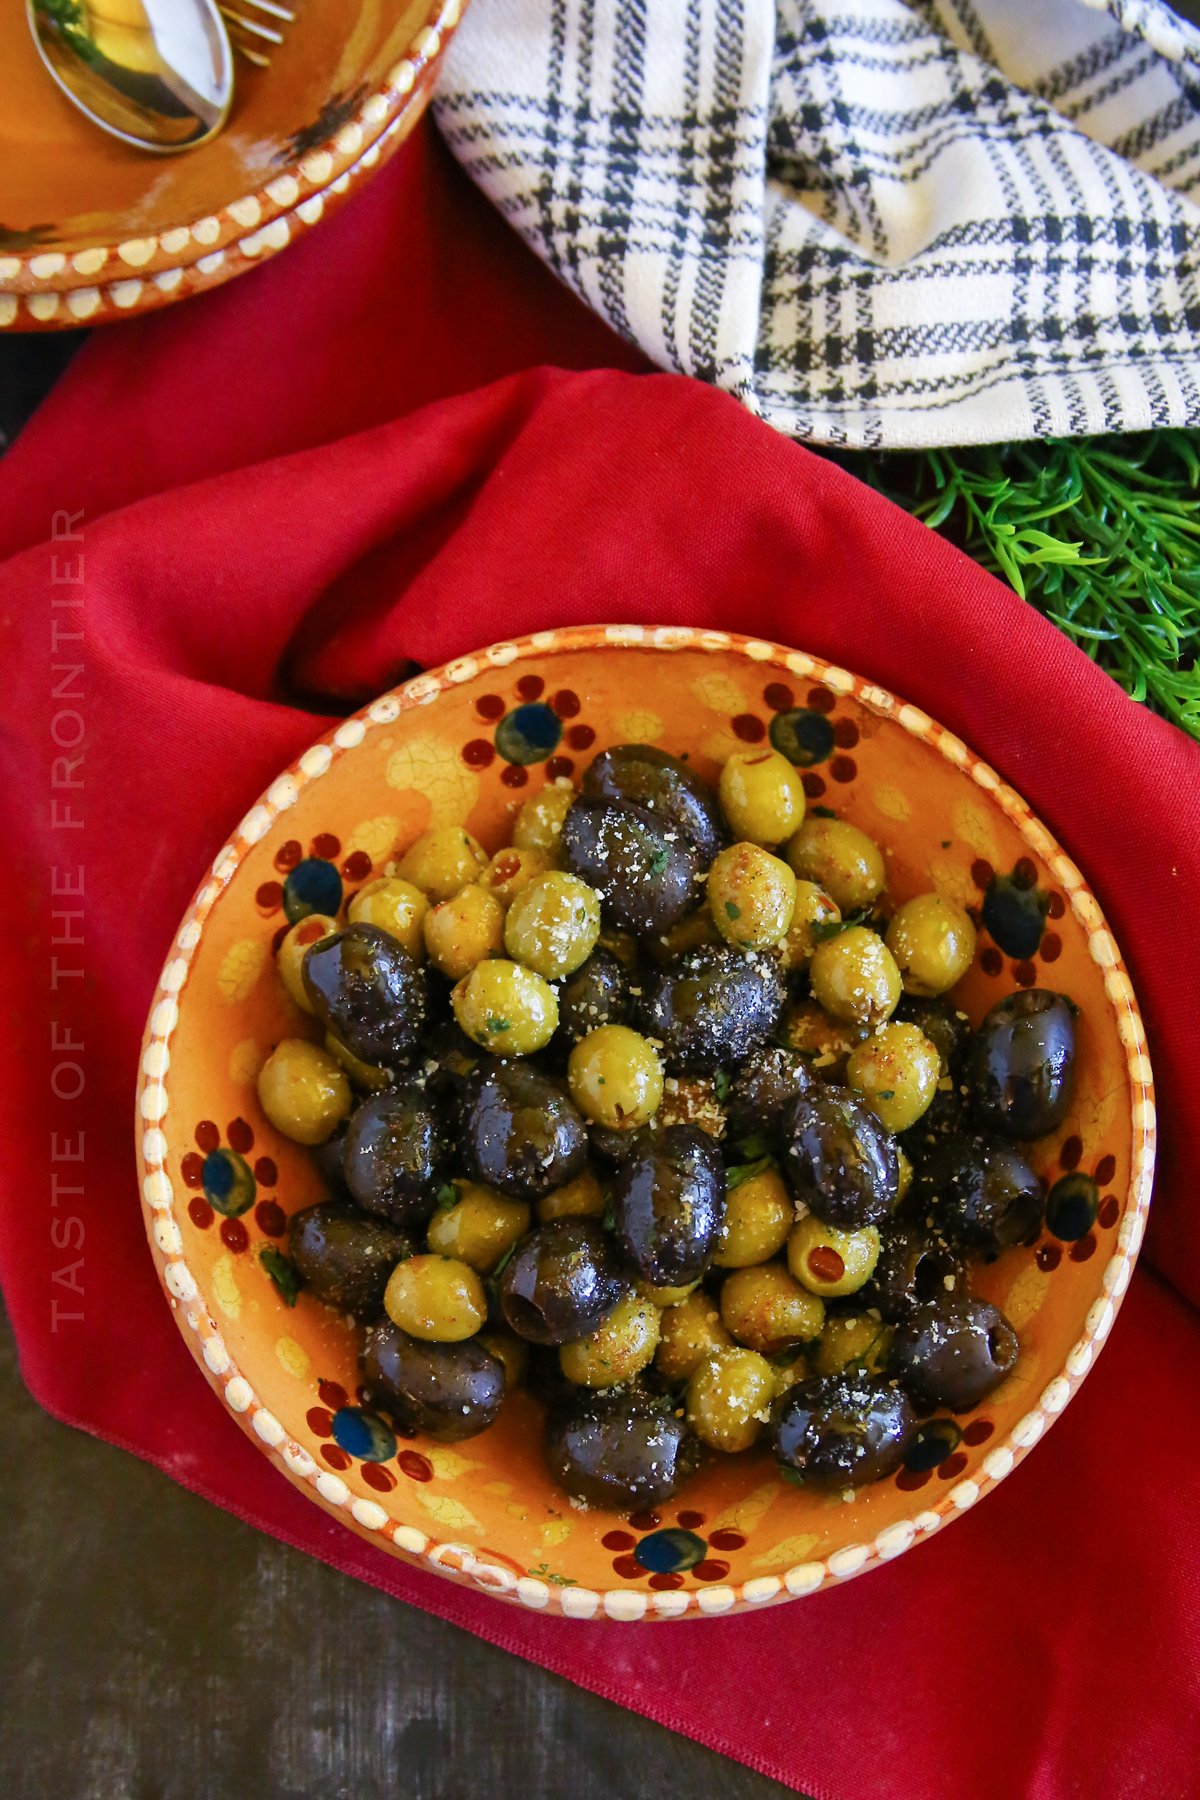 Traeger Smoked Olives